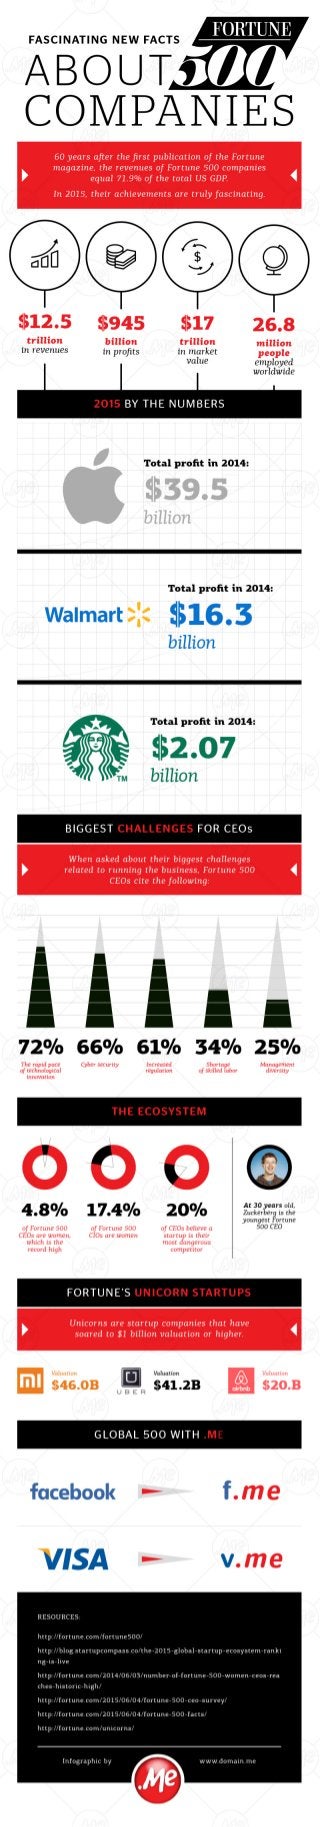 [INFOGRAPHIC] Fascinating New Facts about Fortune 500 Companies